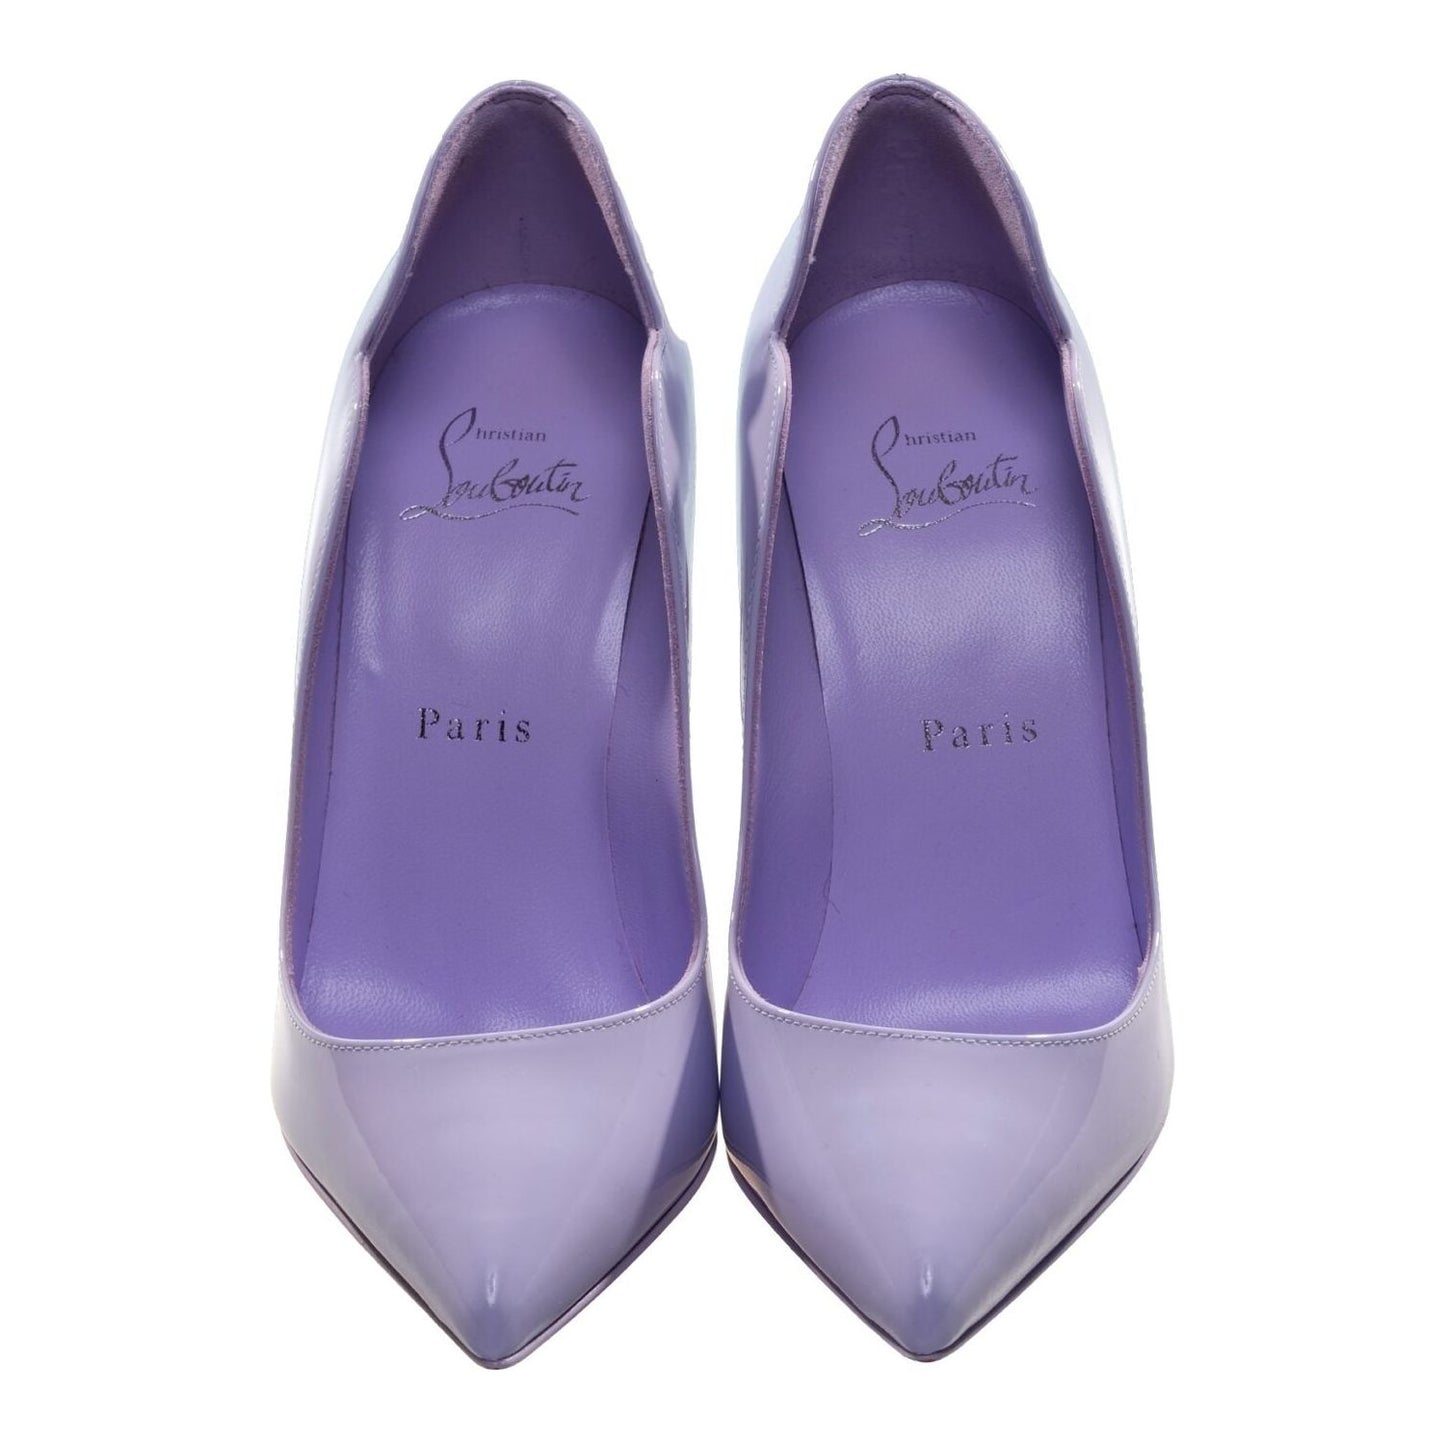 Hot Chick 100 Lilac Patent Leather High Heel Pump